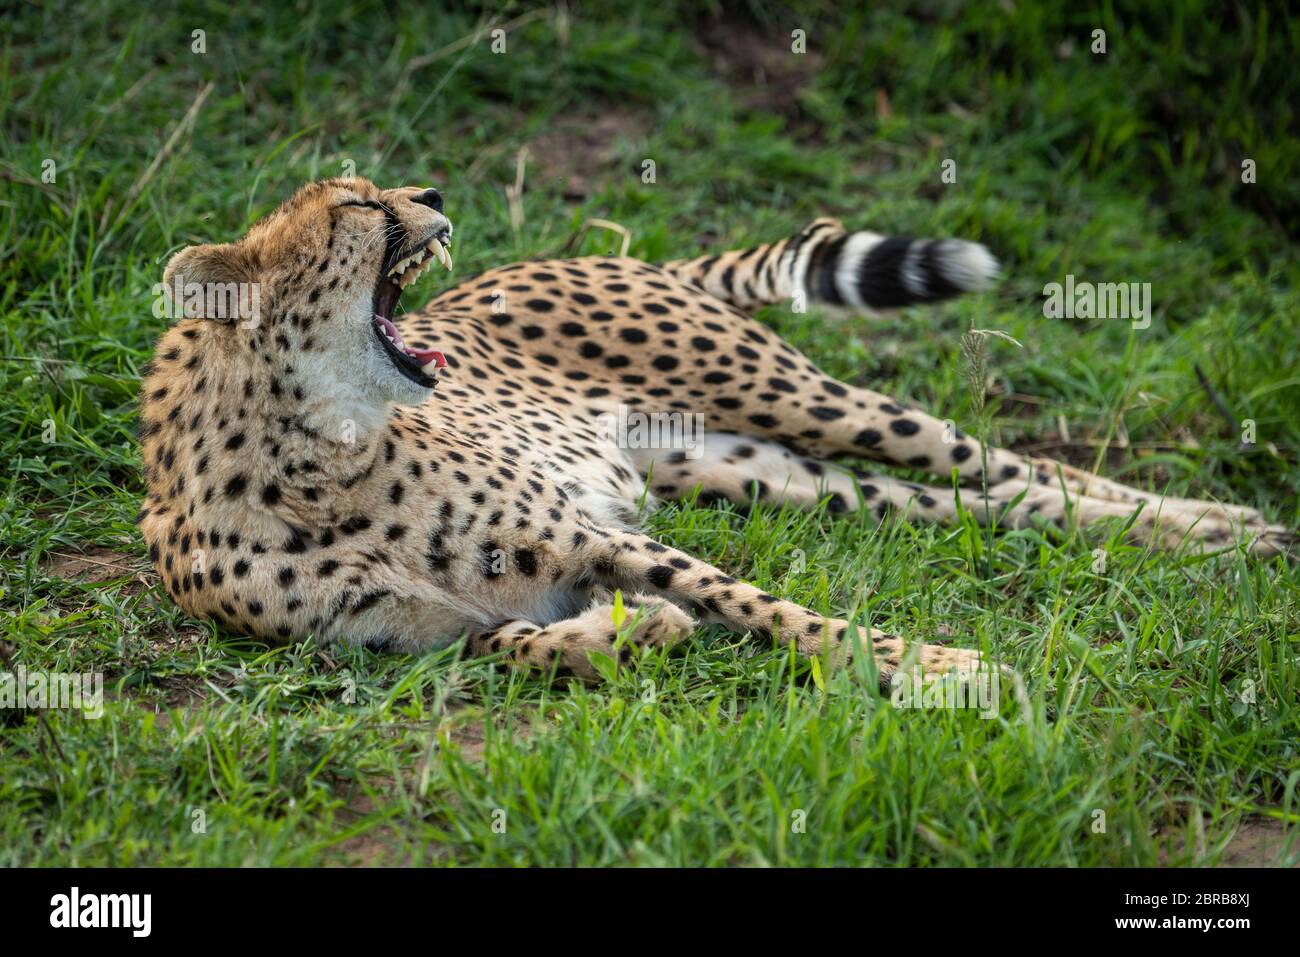 Cheetah lies yawning widely in short grass Stock Photo